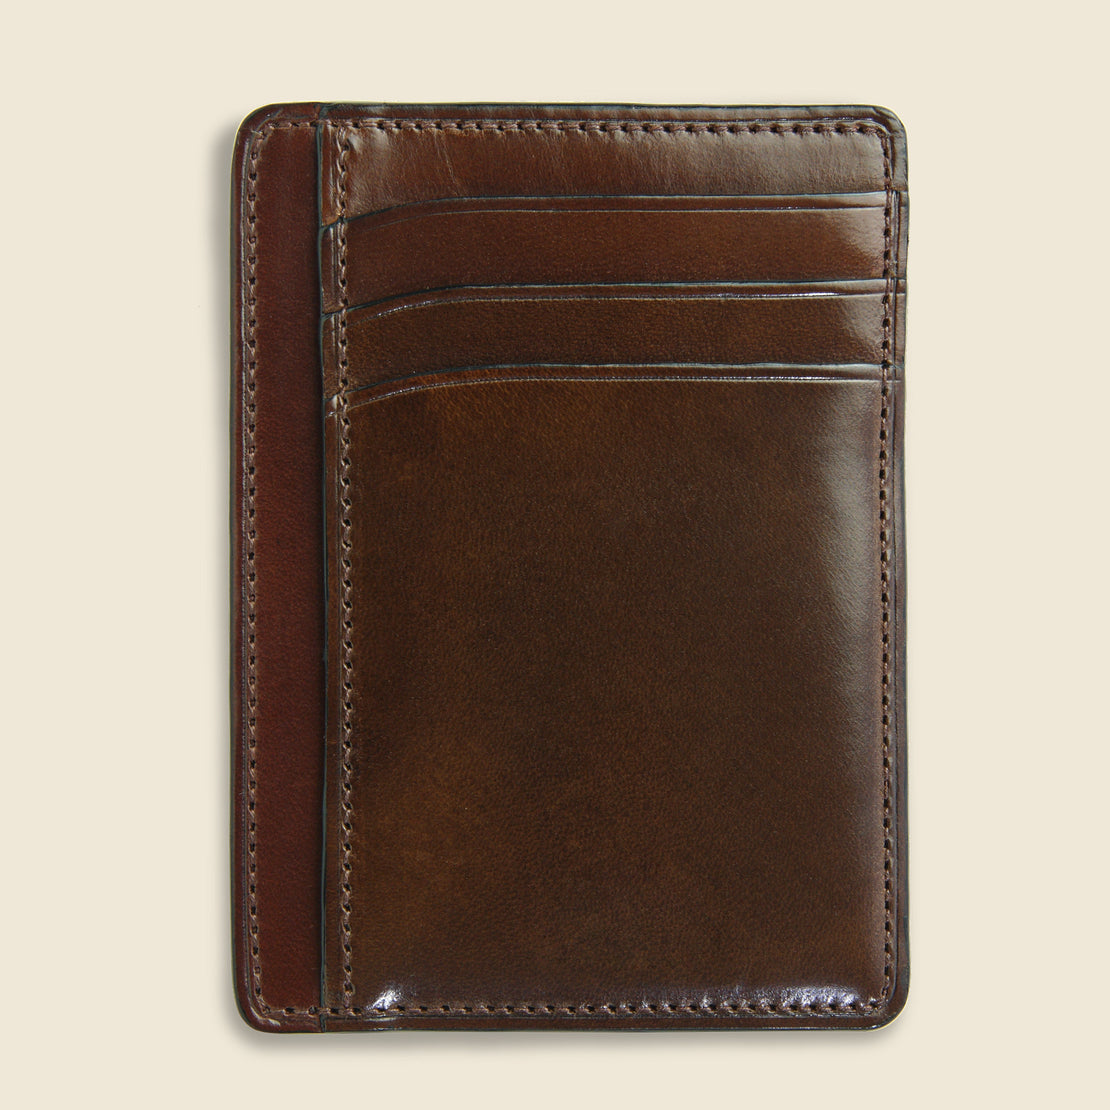 Card and Document Case - Dark Brown - Il Bussetto - STAG Provisions - Accessories - Wallets